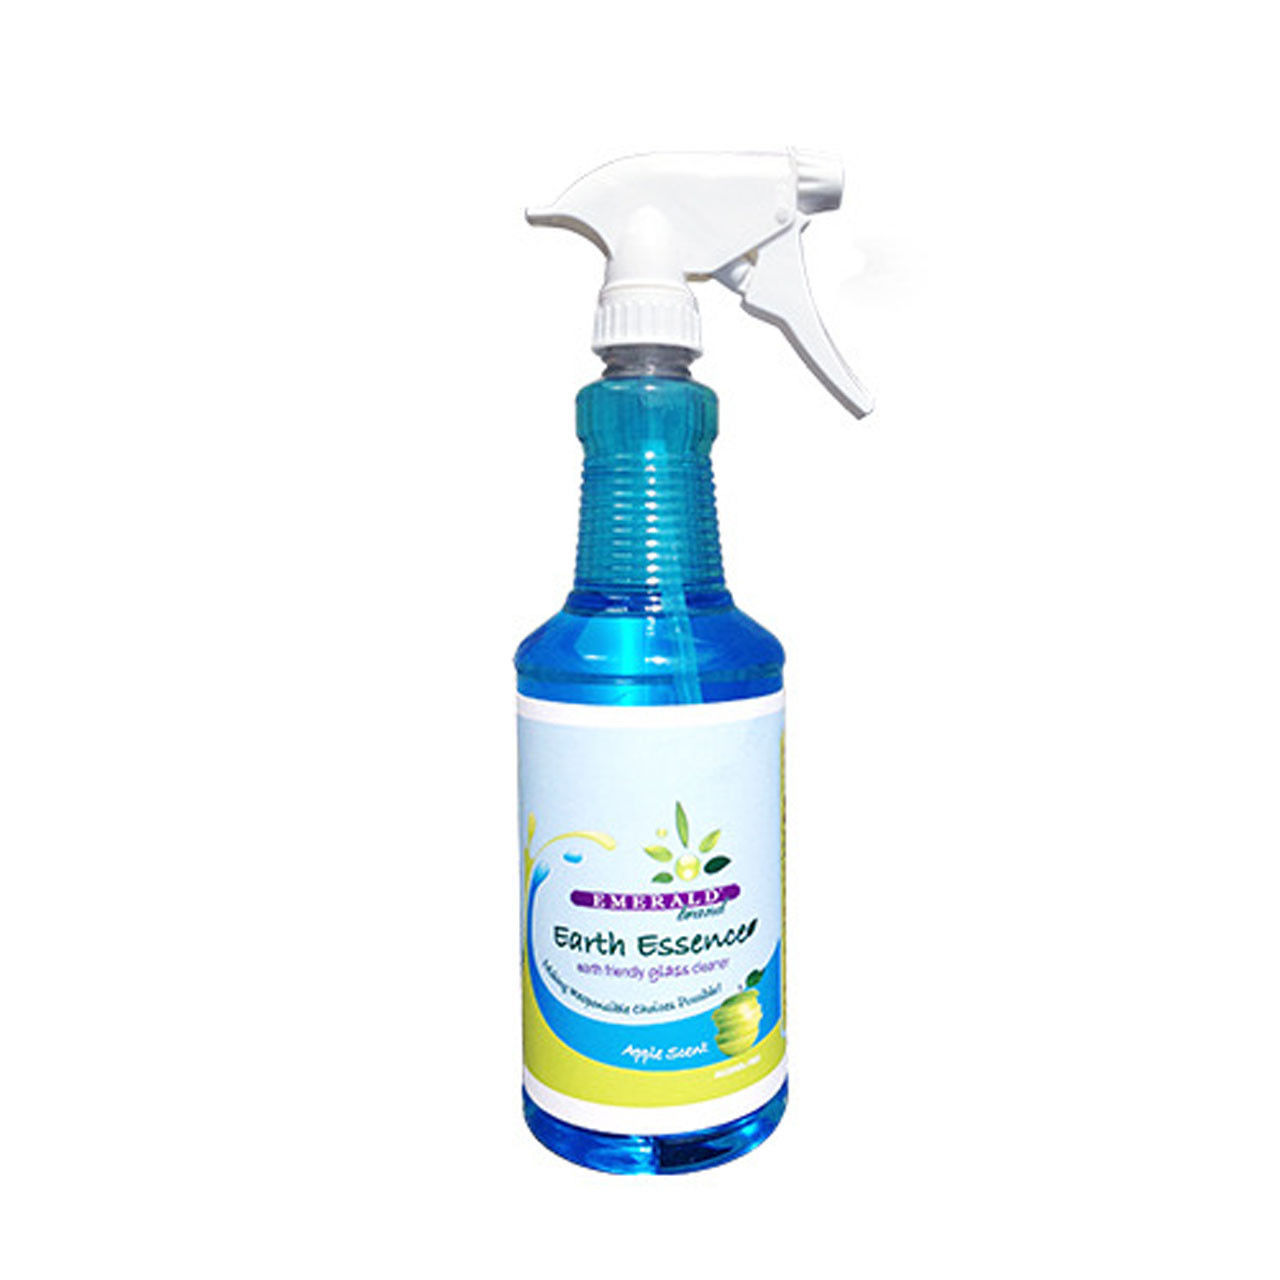 Why is the Emerald Earth Essence Glass Cleaner an ideal choice for cleaning?